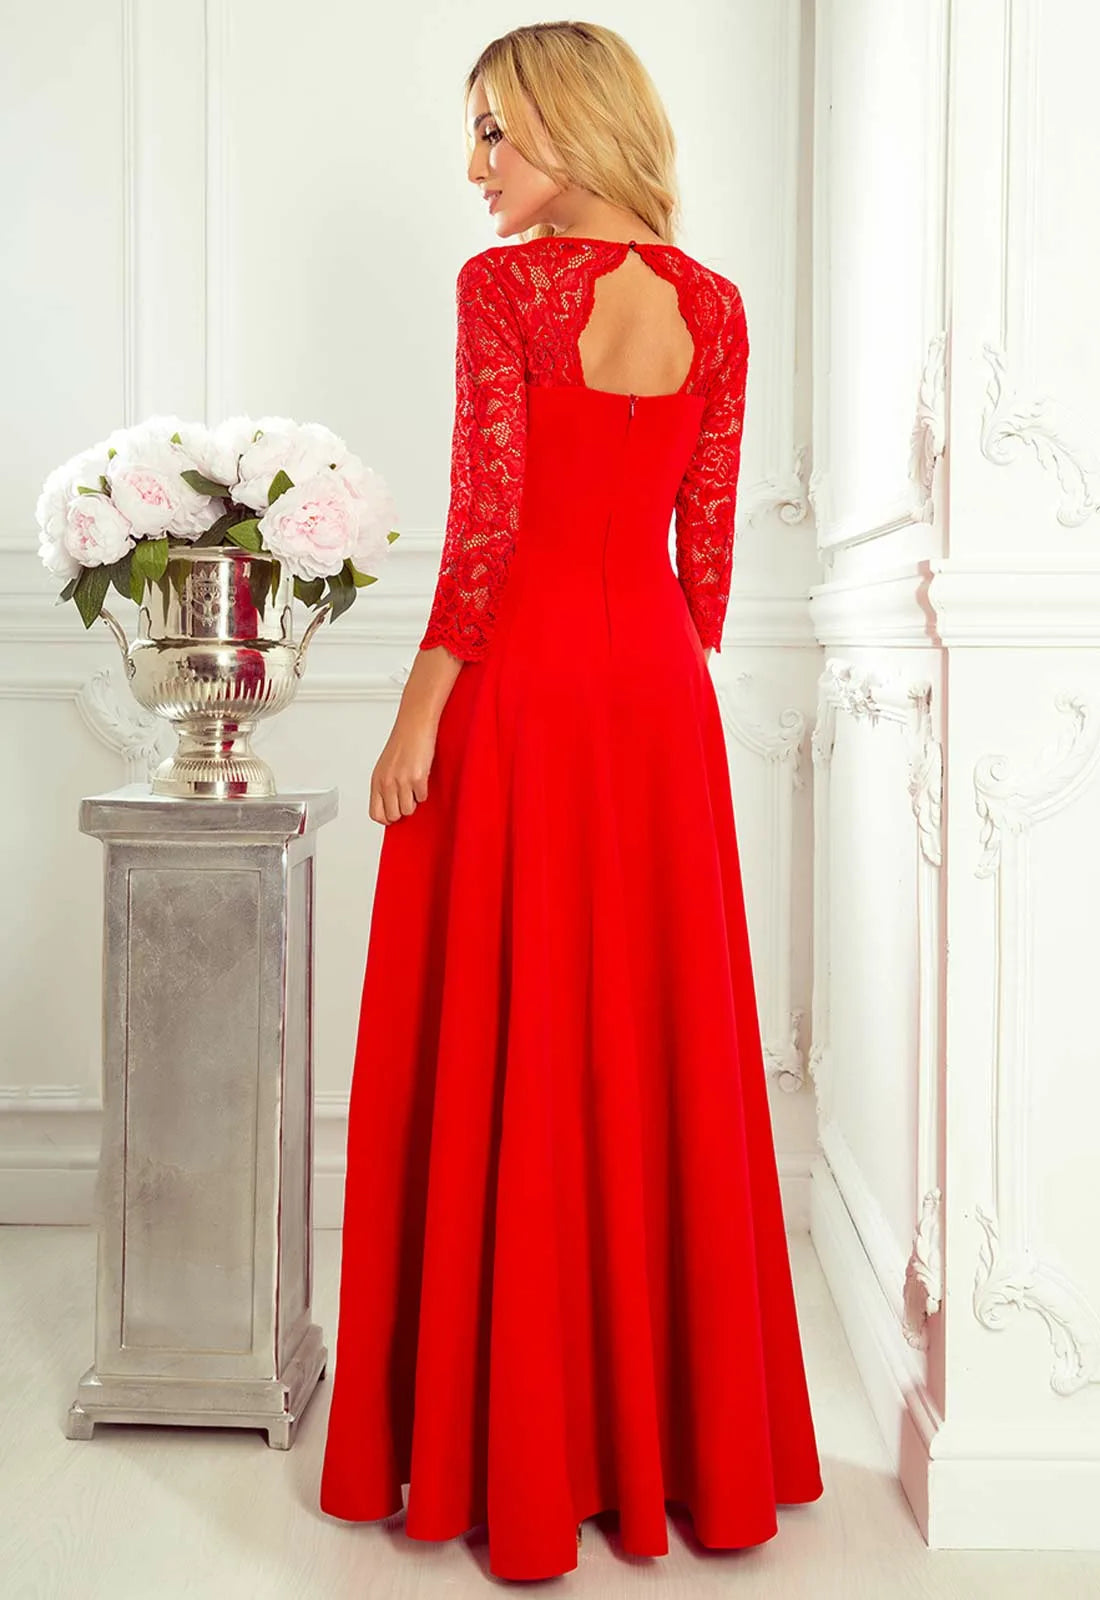 Red Amber Lace Maxi Dress